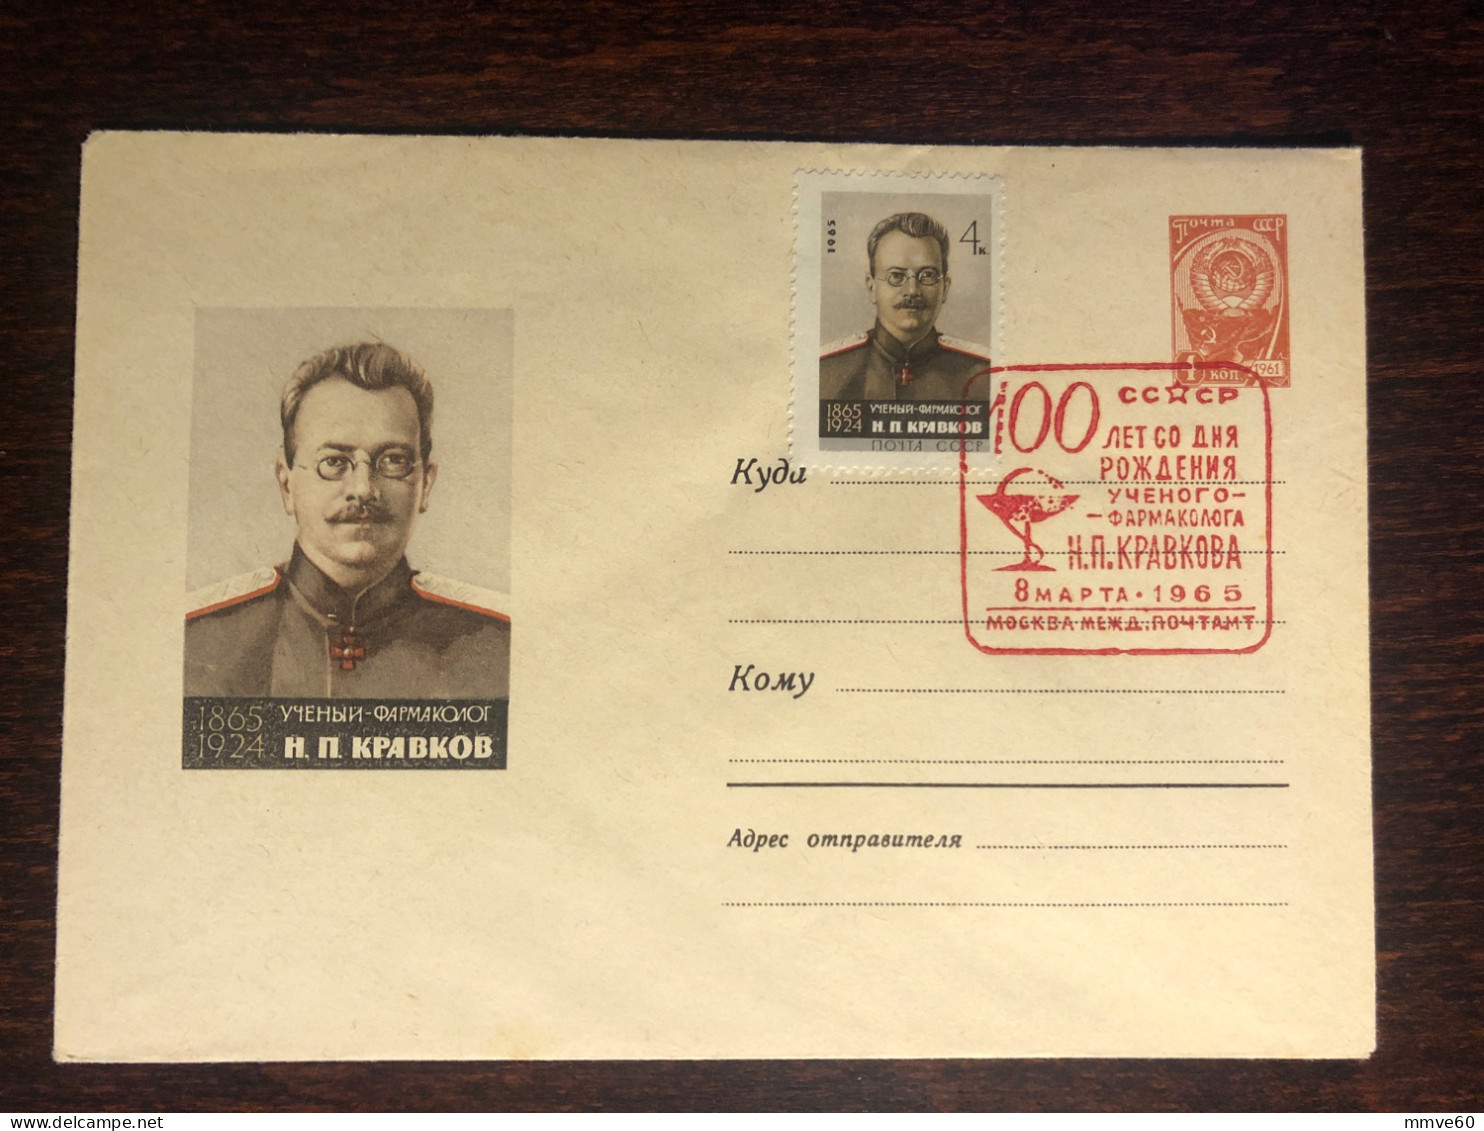 RUSSIA USSR FDC COVER 1965 YEAR KRAVKOV PHARMACOLOGY PHARMACY HEALTH MEDICINE STAMPS - Covers & Documents